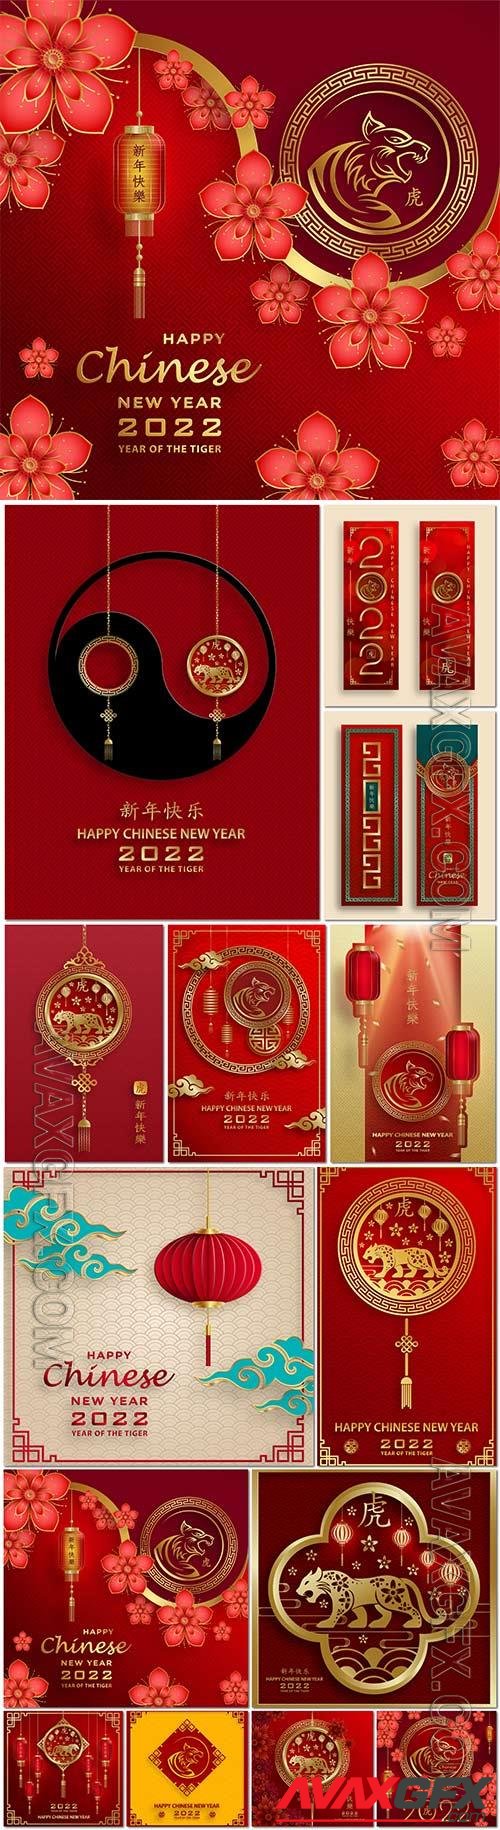 Happy new year 2022, tiger zodiac sign chinese vector design